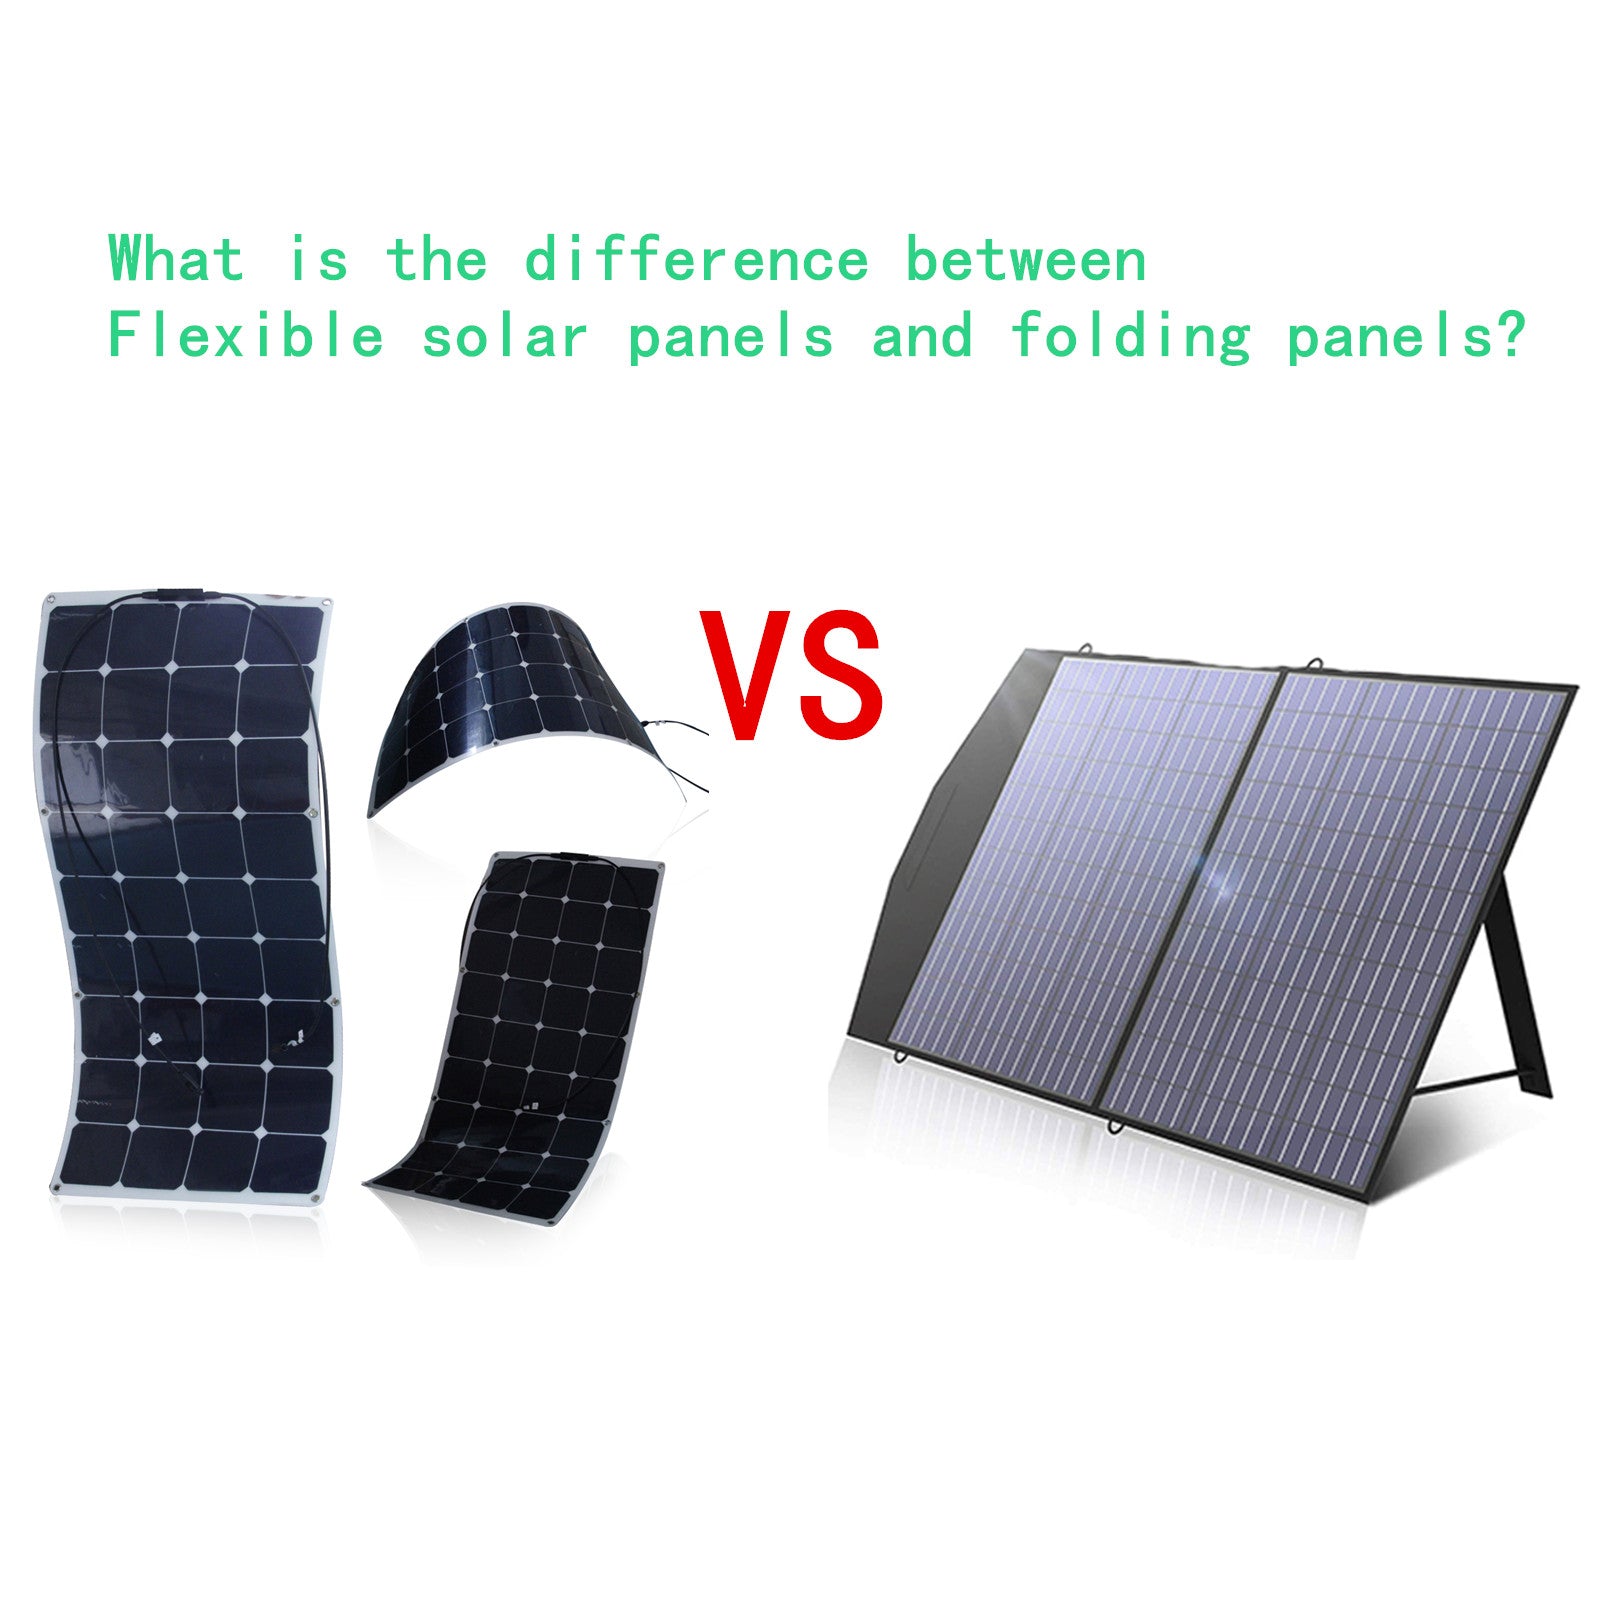 What is the difference between Flexible solar panel and Folding solar panels?